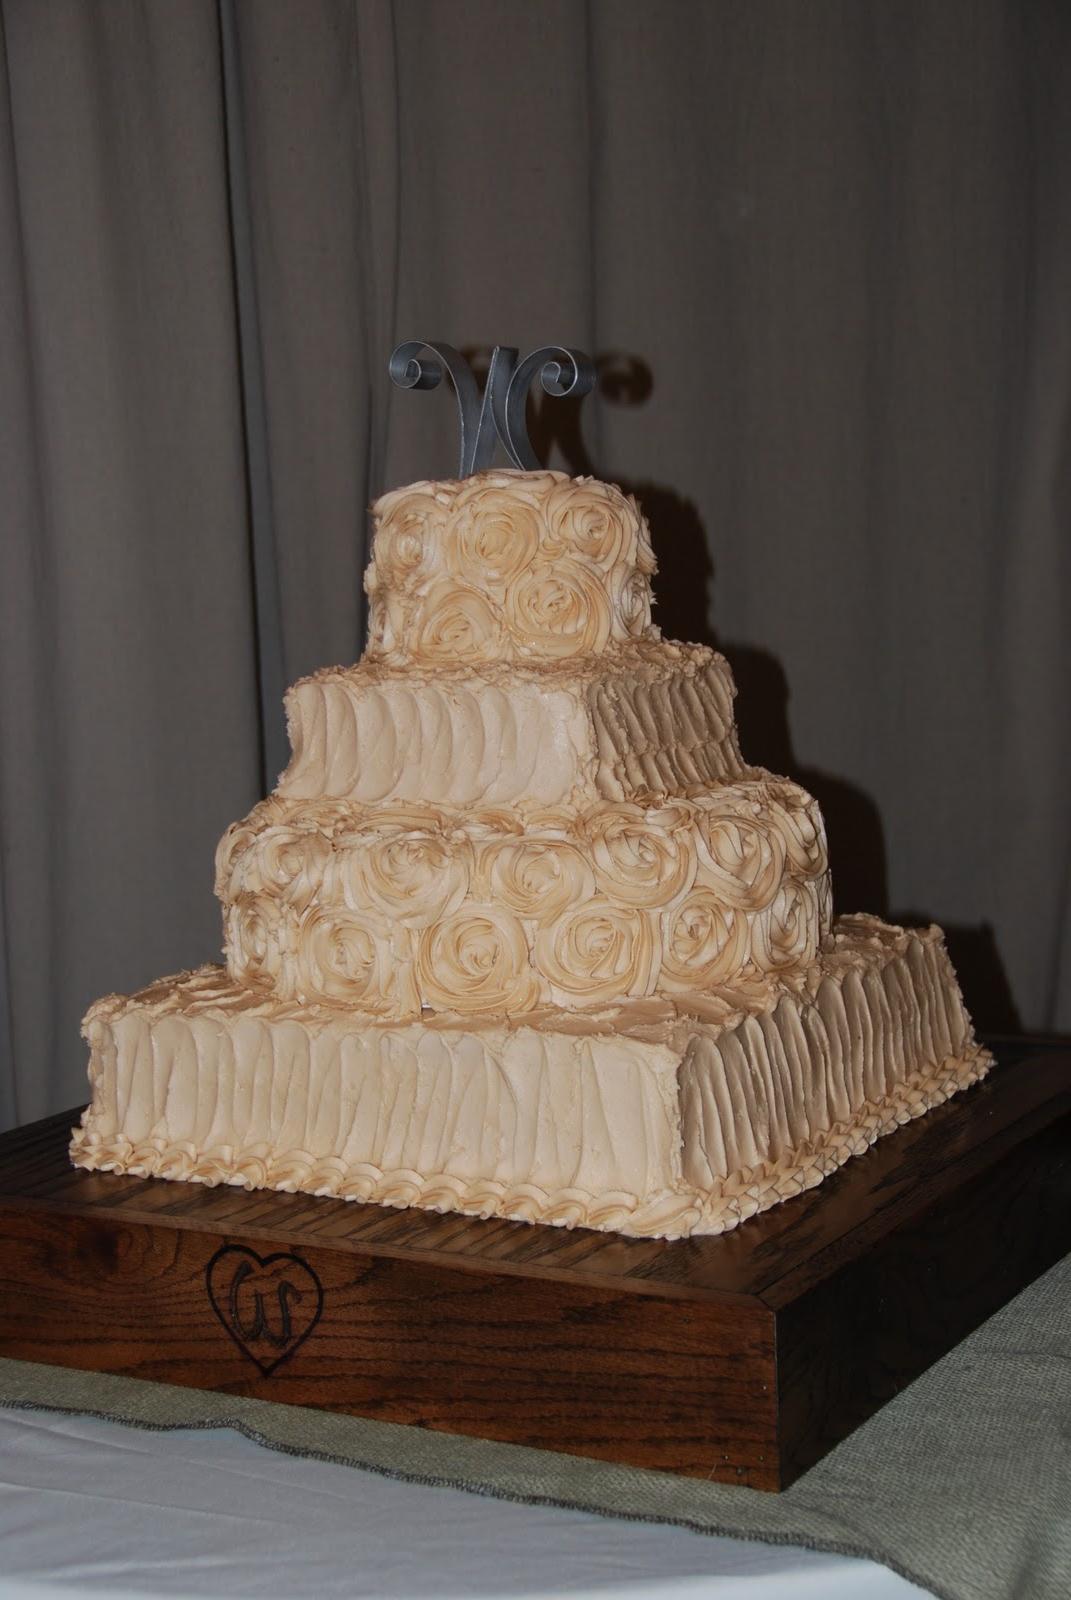 This is the wedding cake I did